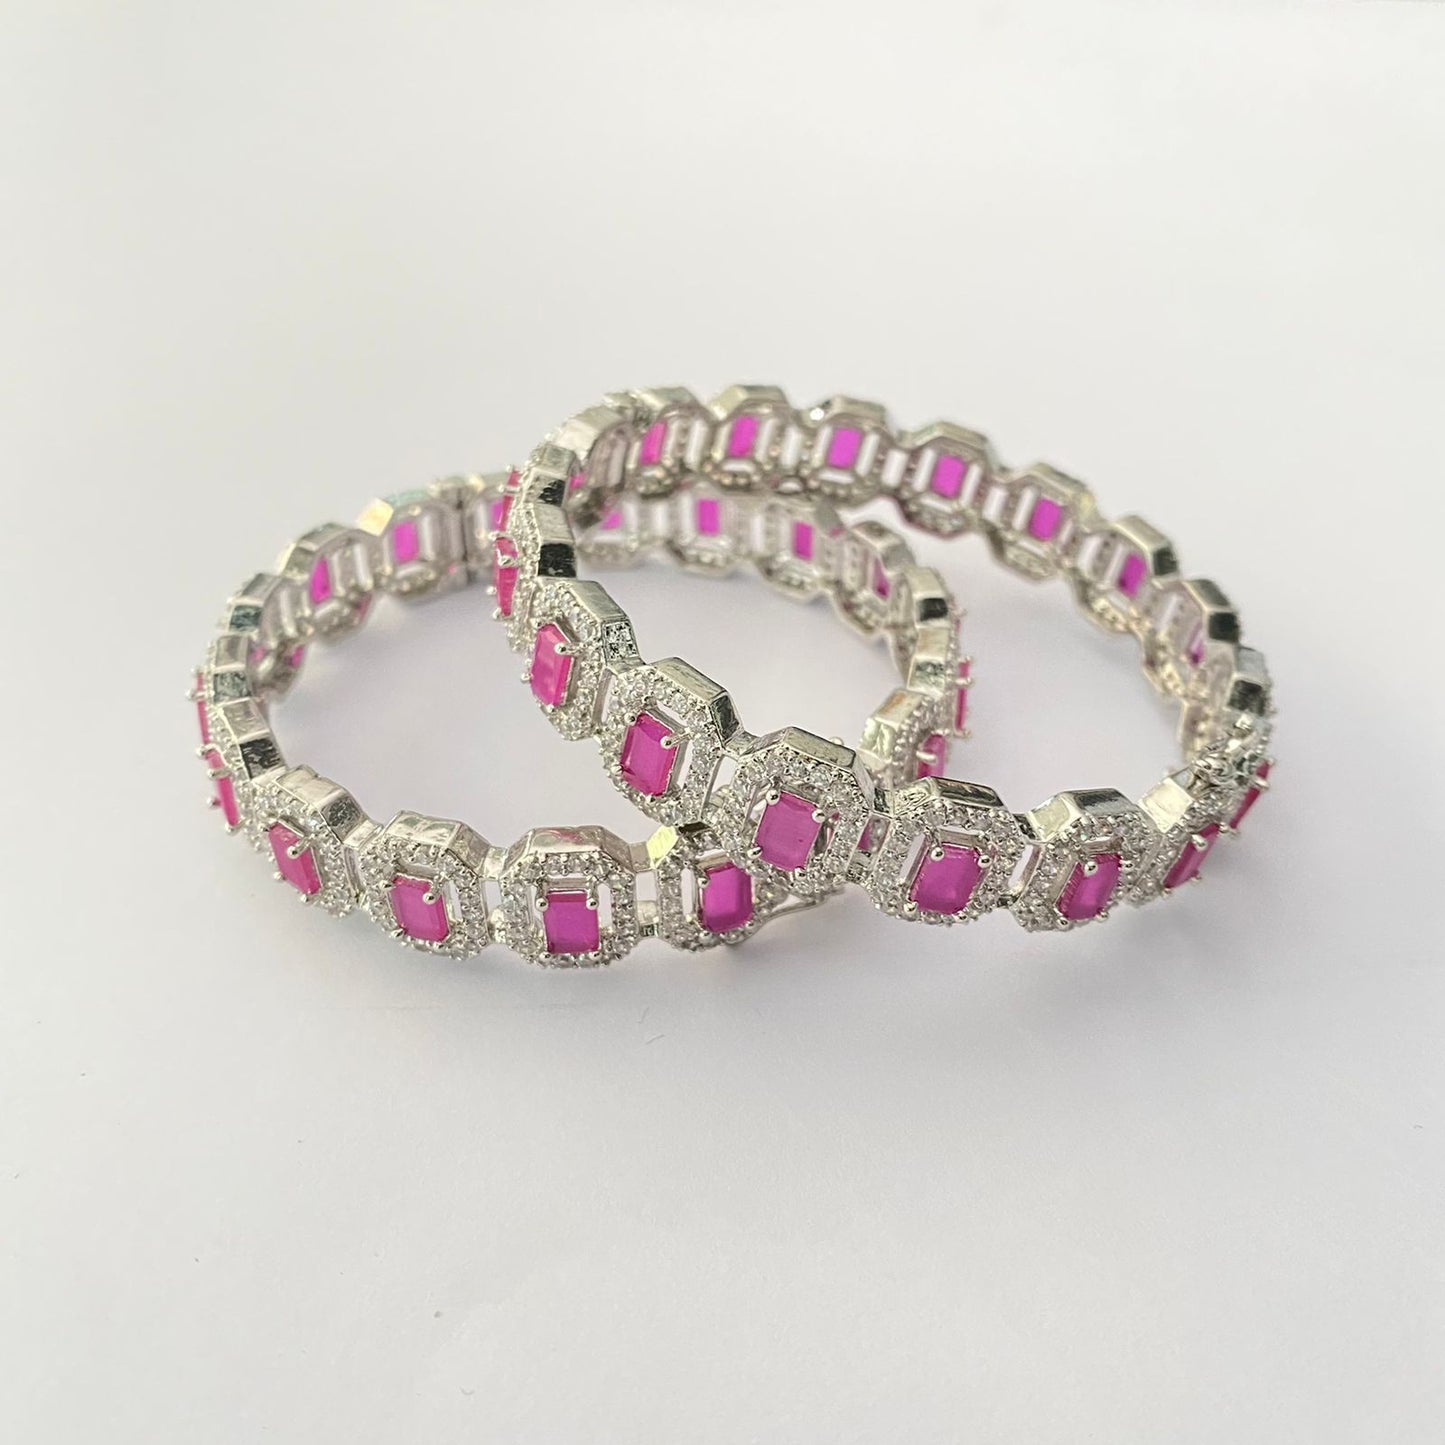 PINK STONE SILVER PLATED BANGLE.